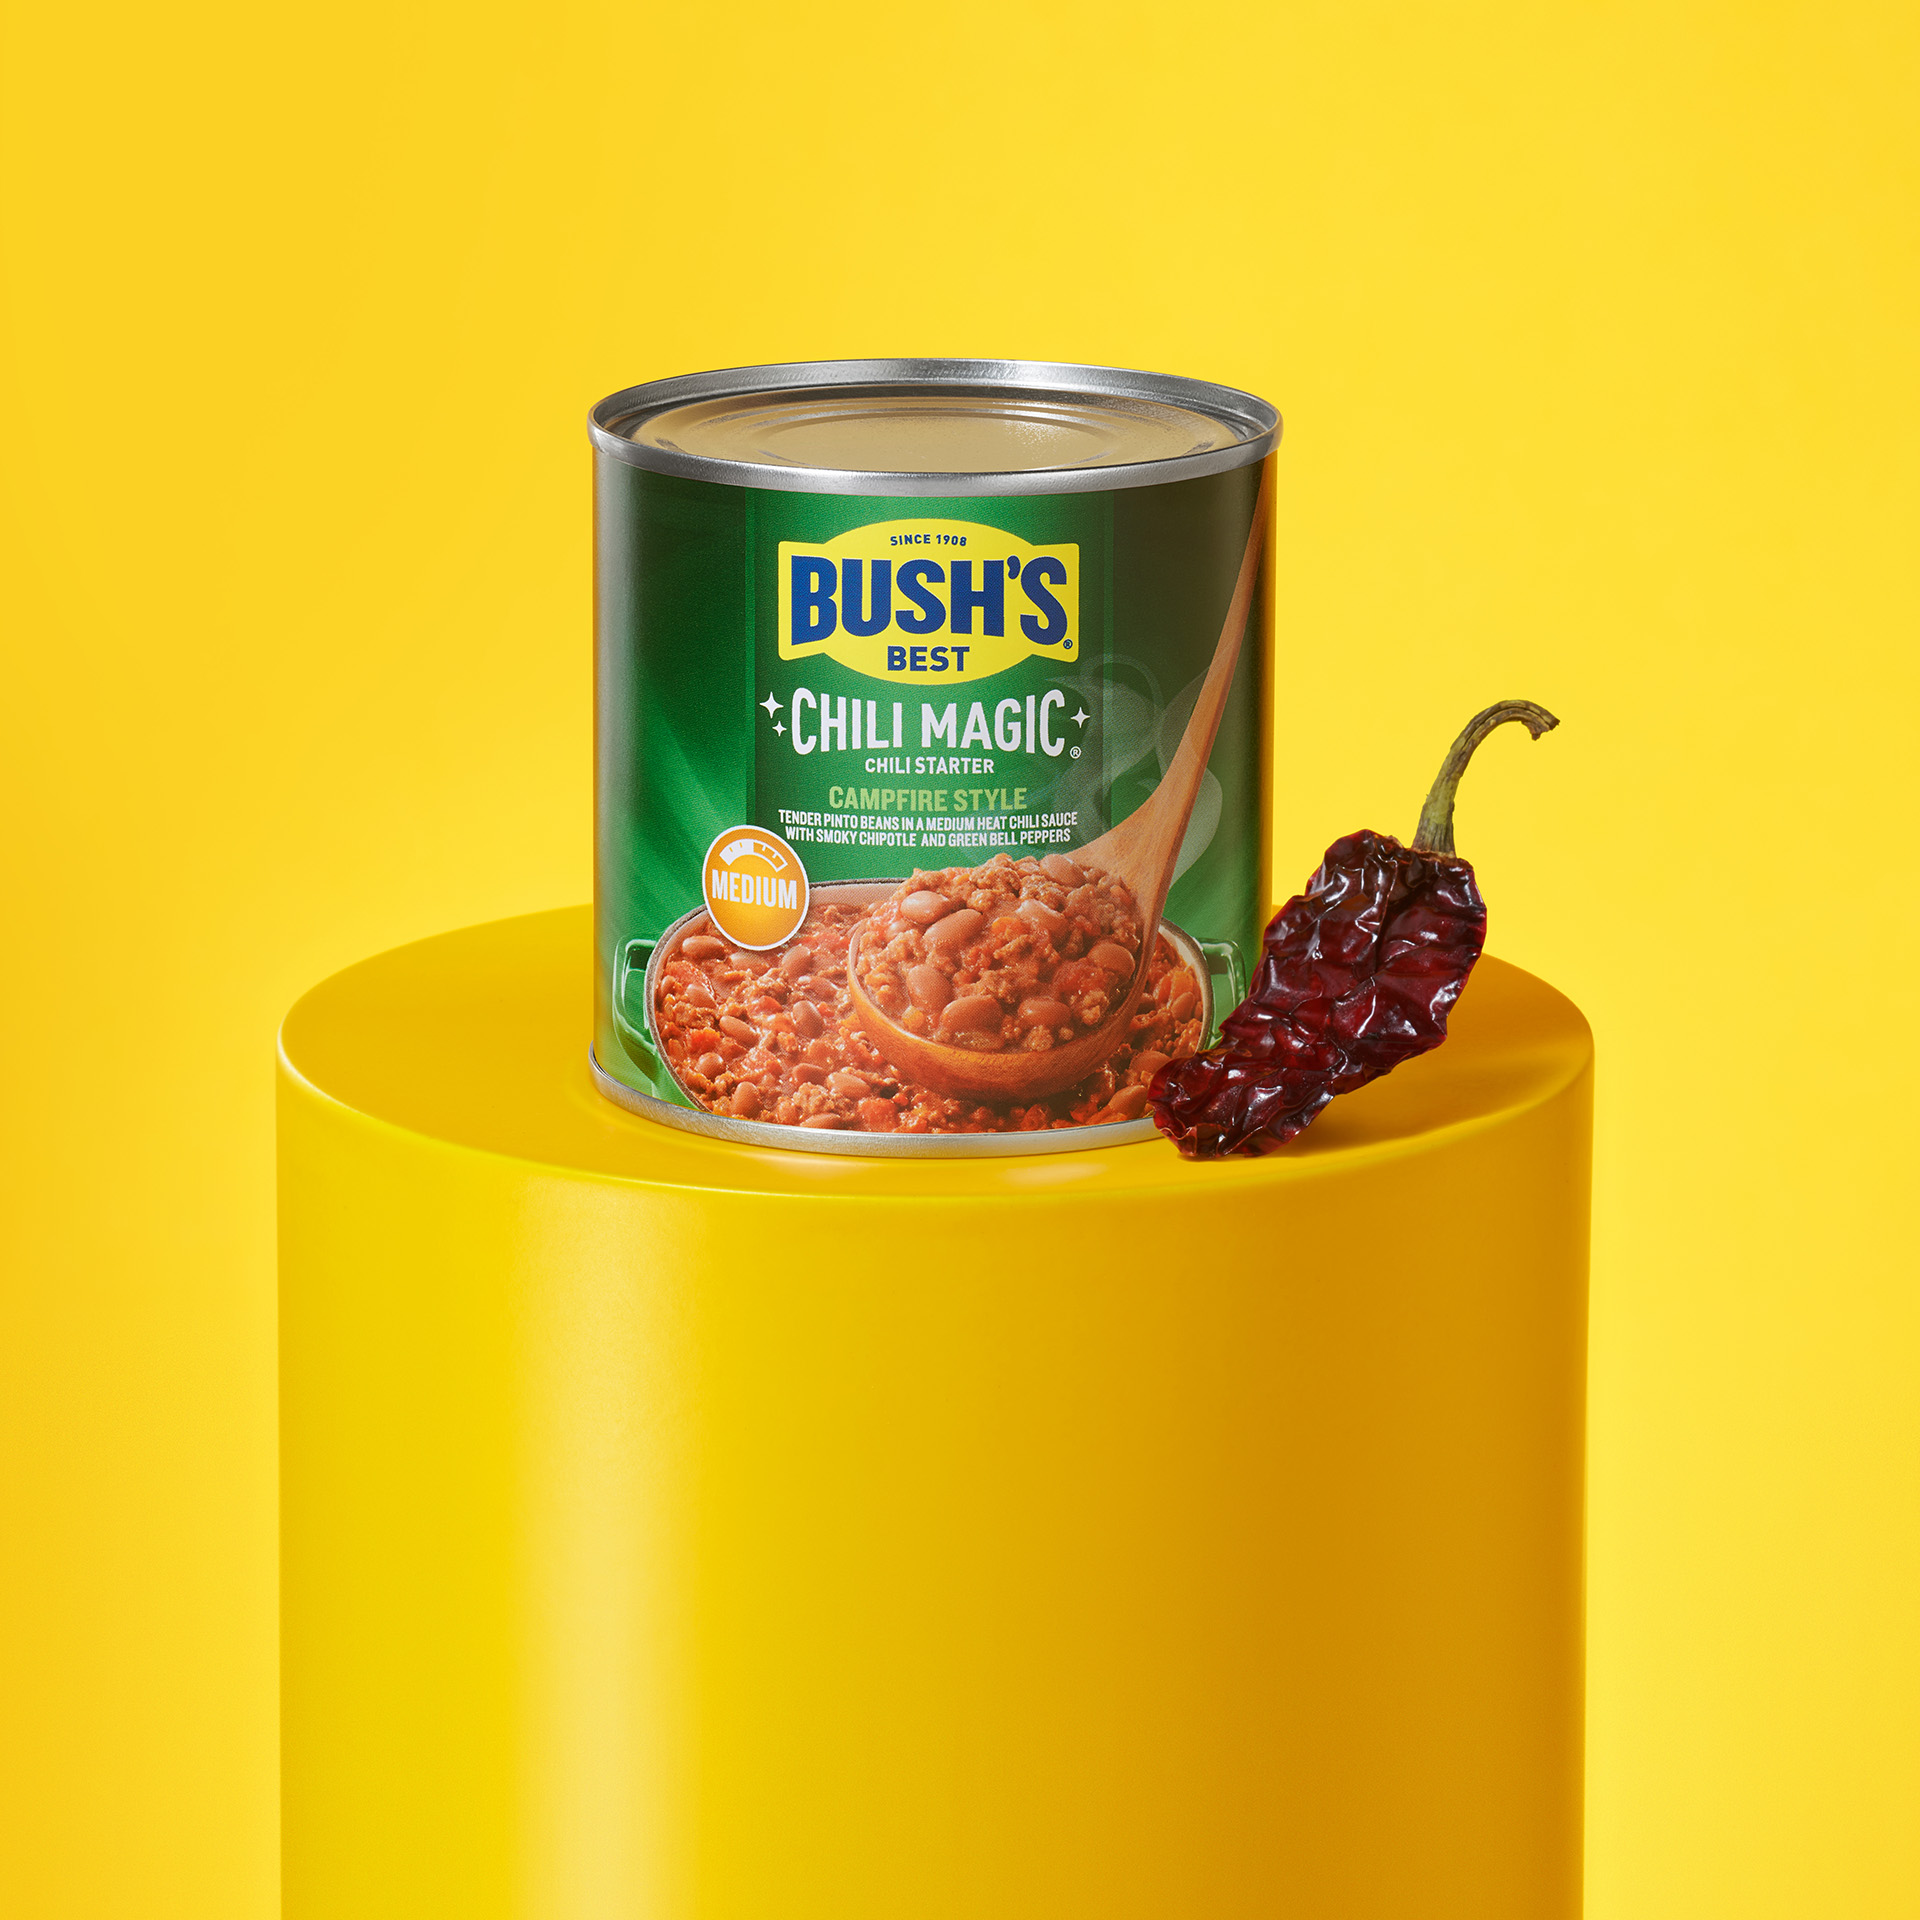 Can of Bush’s Chili Magic Campfire Style on a pedestal with a dried pepper.